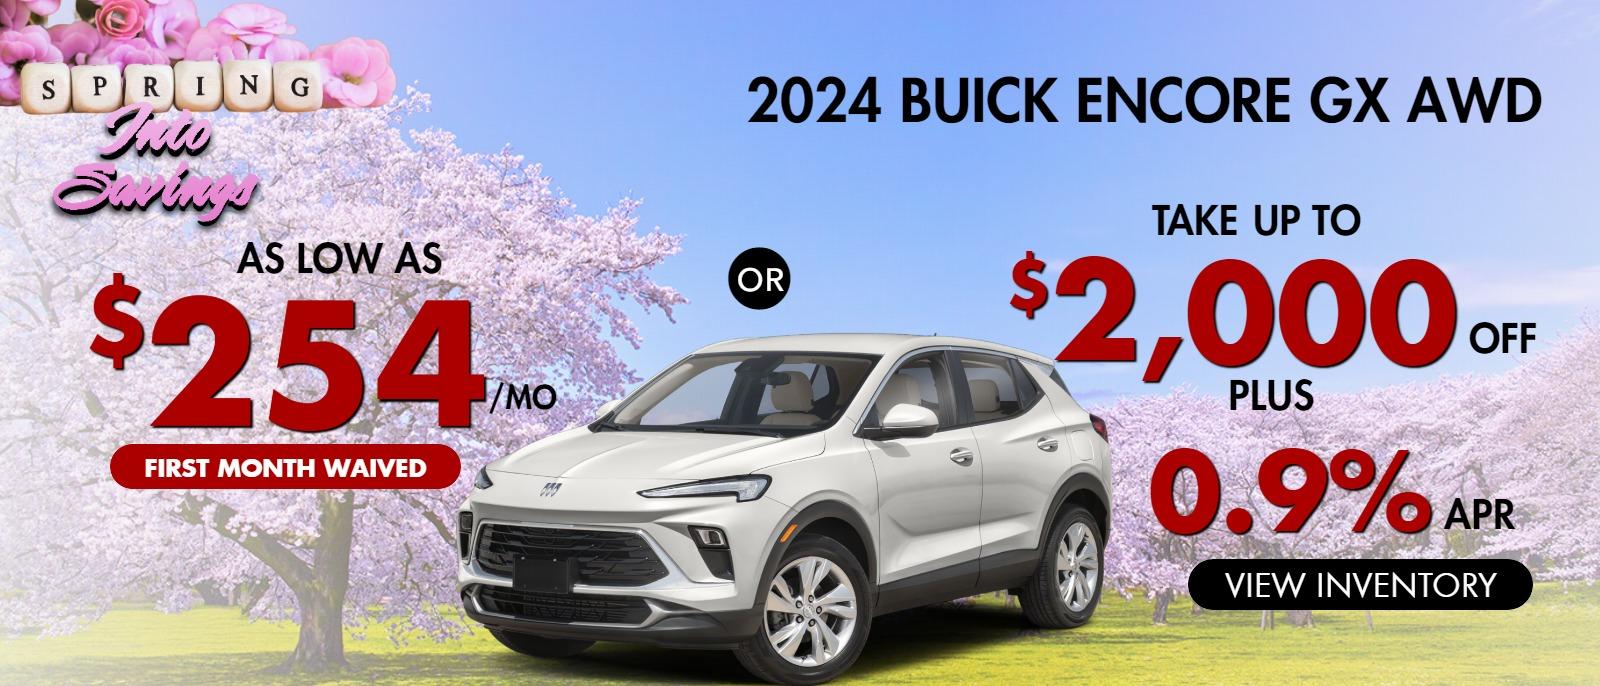 2024 Encore GX AWD 
Stock B3806


take up to $2000 OFF & 0.9% finance

Or
AS LOW AS 
$254/mo (first month waived)